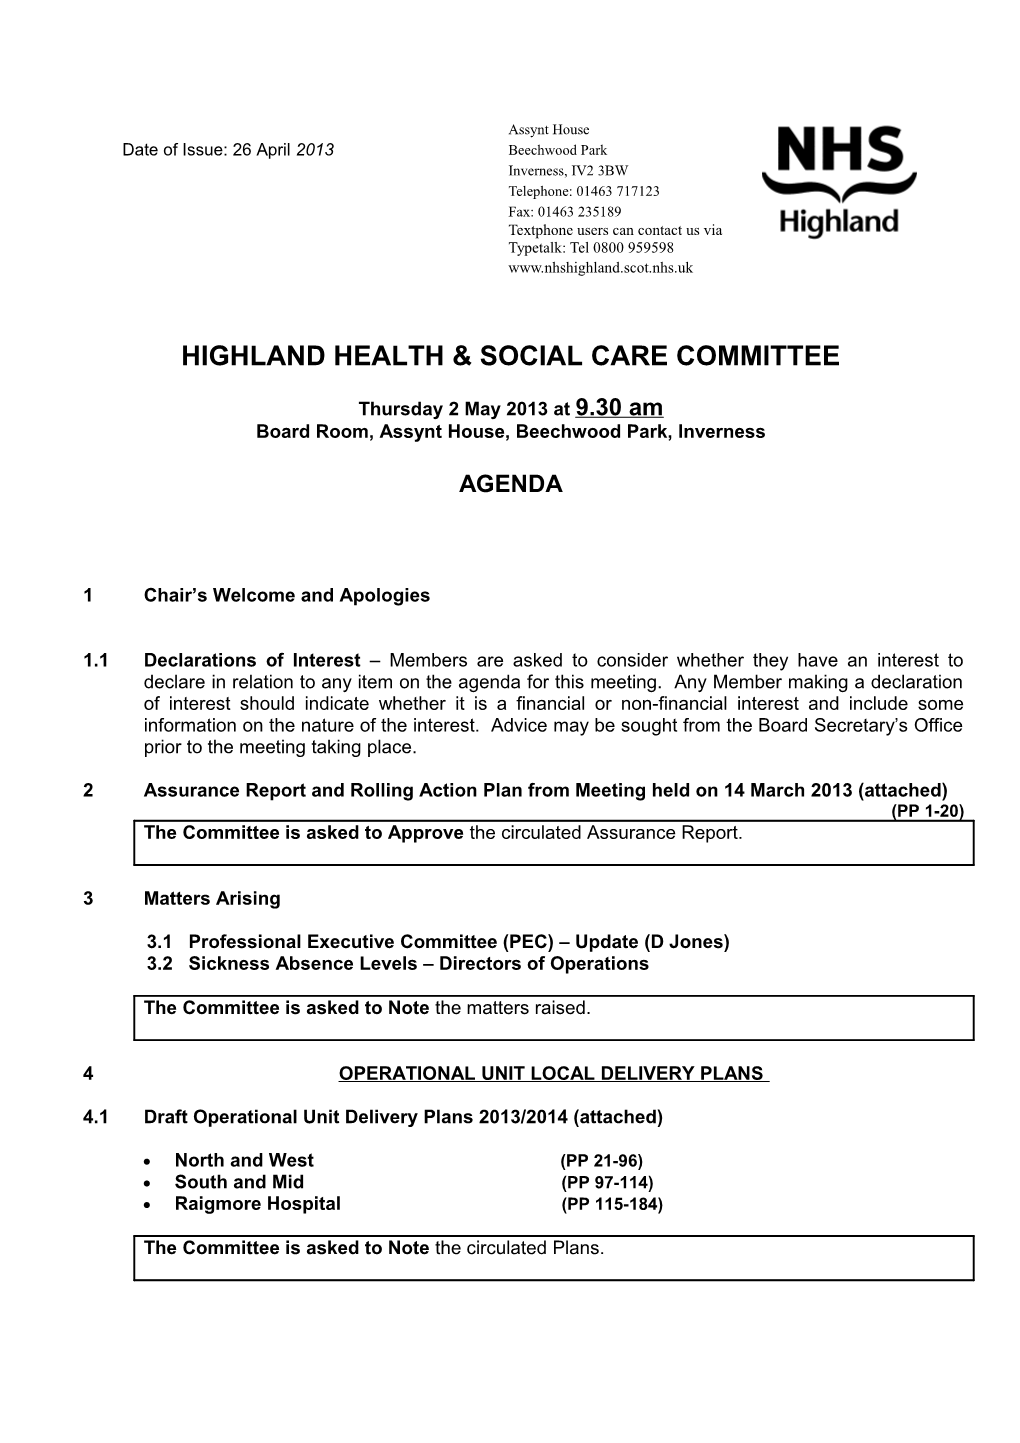 Highland Health & Social Care Committee